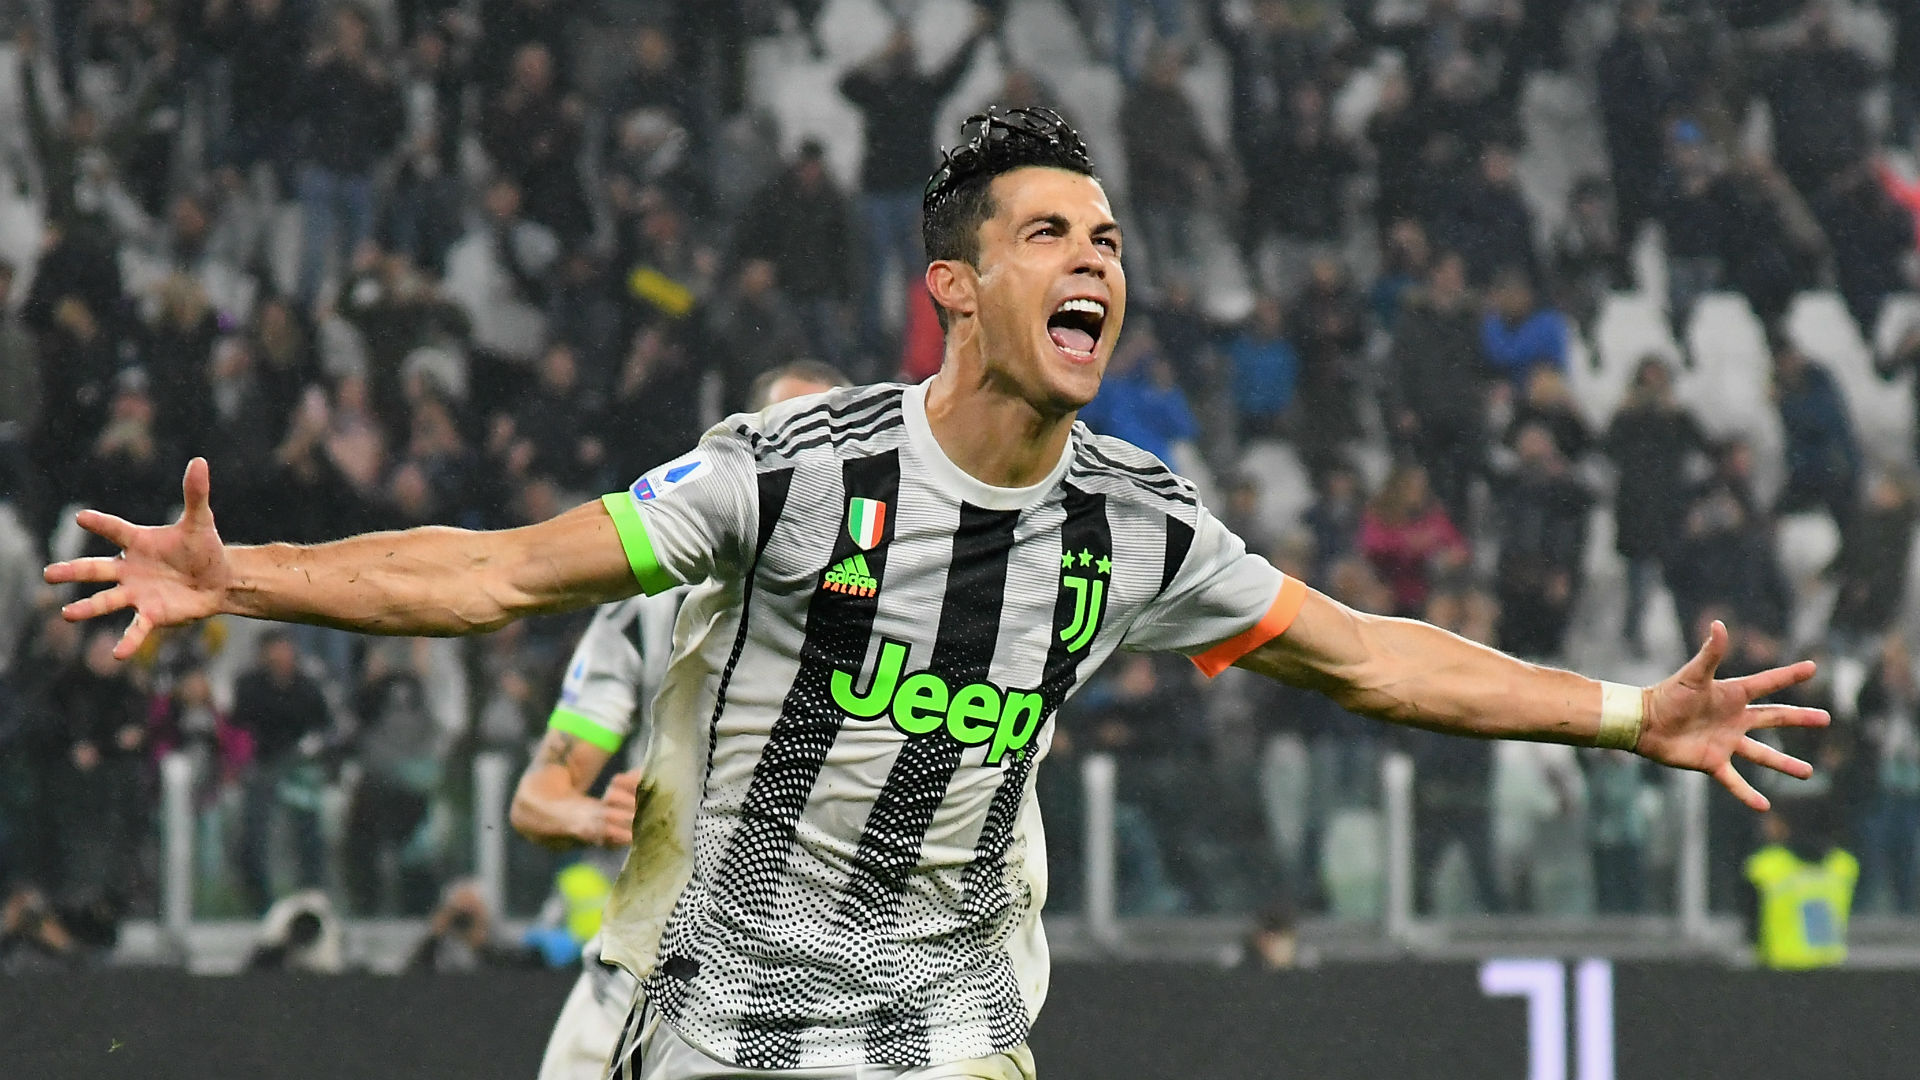 Cristiano Ronaldo signed for Juventus two years ago and there has been little let-up in his prolific ways.